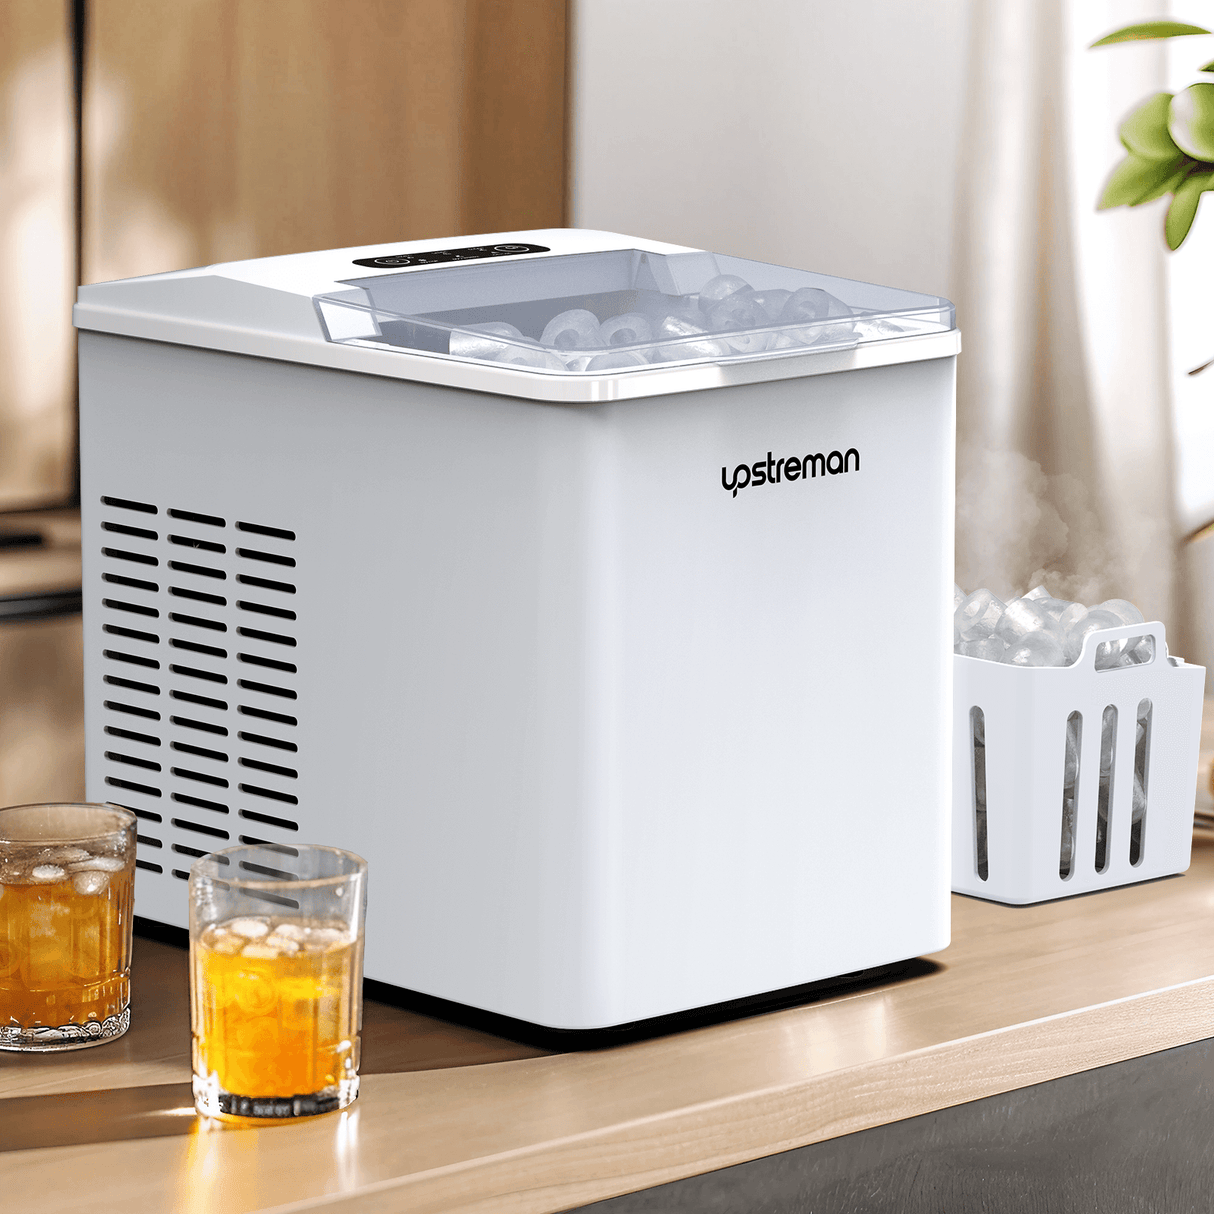 Upstreman Y90 Pro Countertop Ice Maker with Self-Cleaning, 26lbs in 24Hrs, 9 Ice Cubes Ready in 6 Mins, Ice Cube Maker Machine of 2 Sizes Bullet Ice for Home, Kitchen, Office, Bar, Party